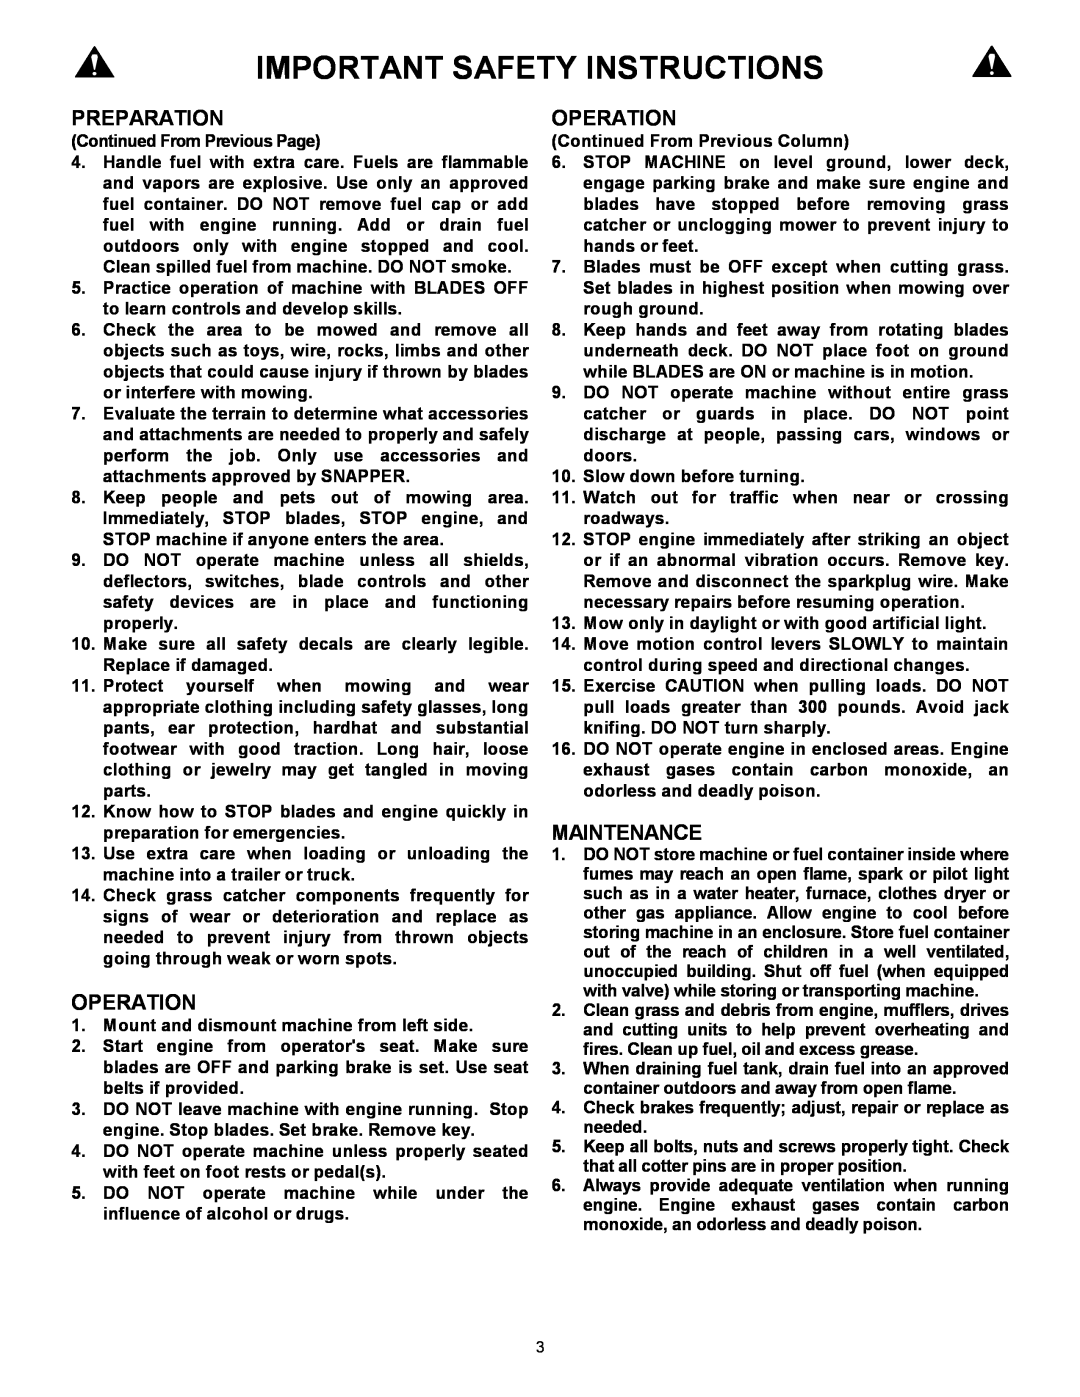 Snapper ZF2301GKU Operation, Maintenance, Important Safety Instructions, Preparation, Continued From Previous Page 